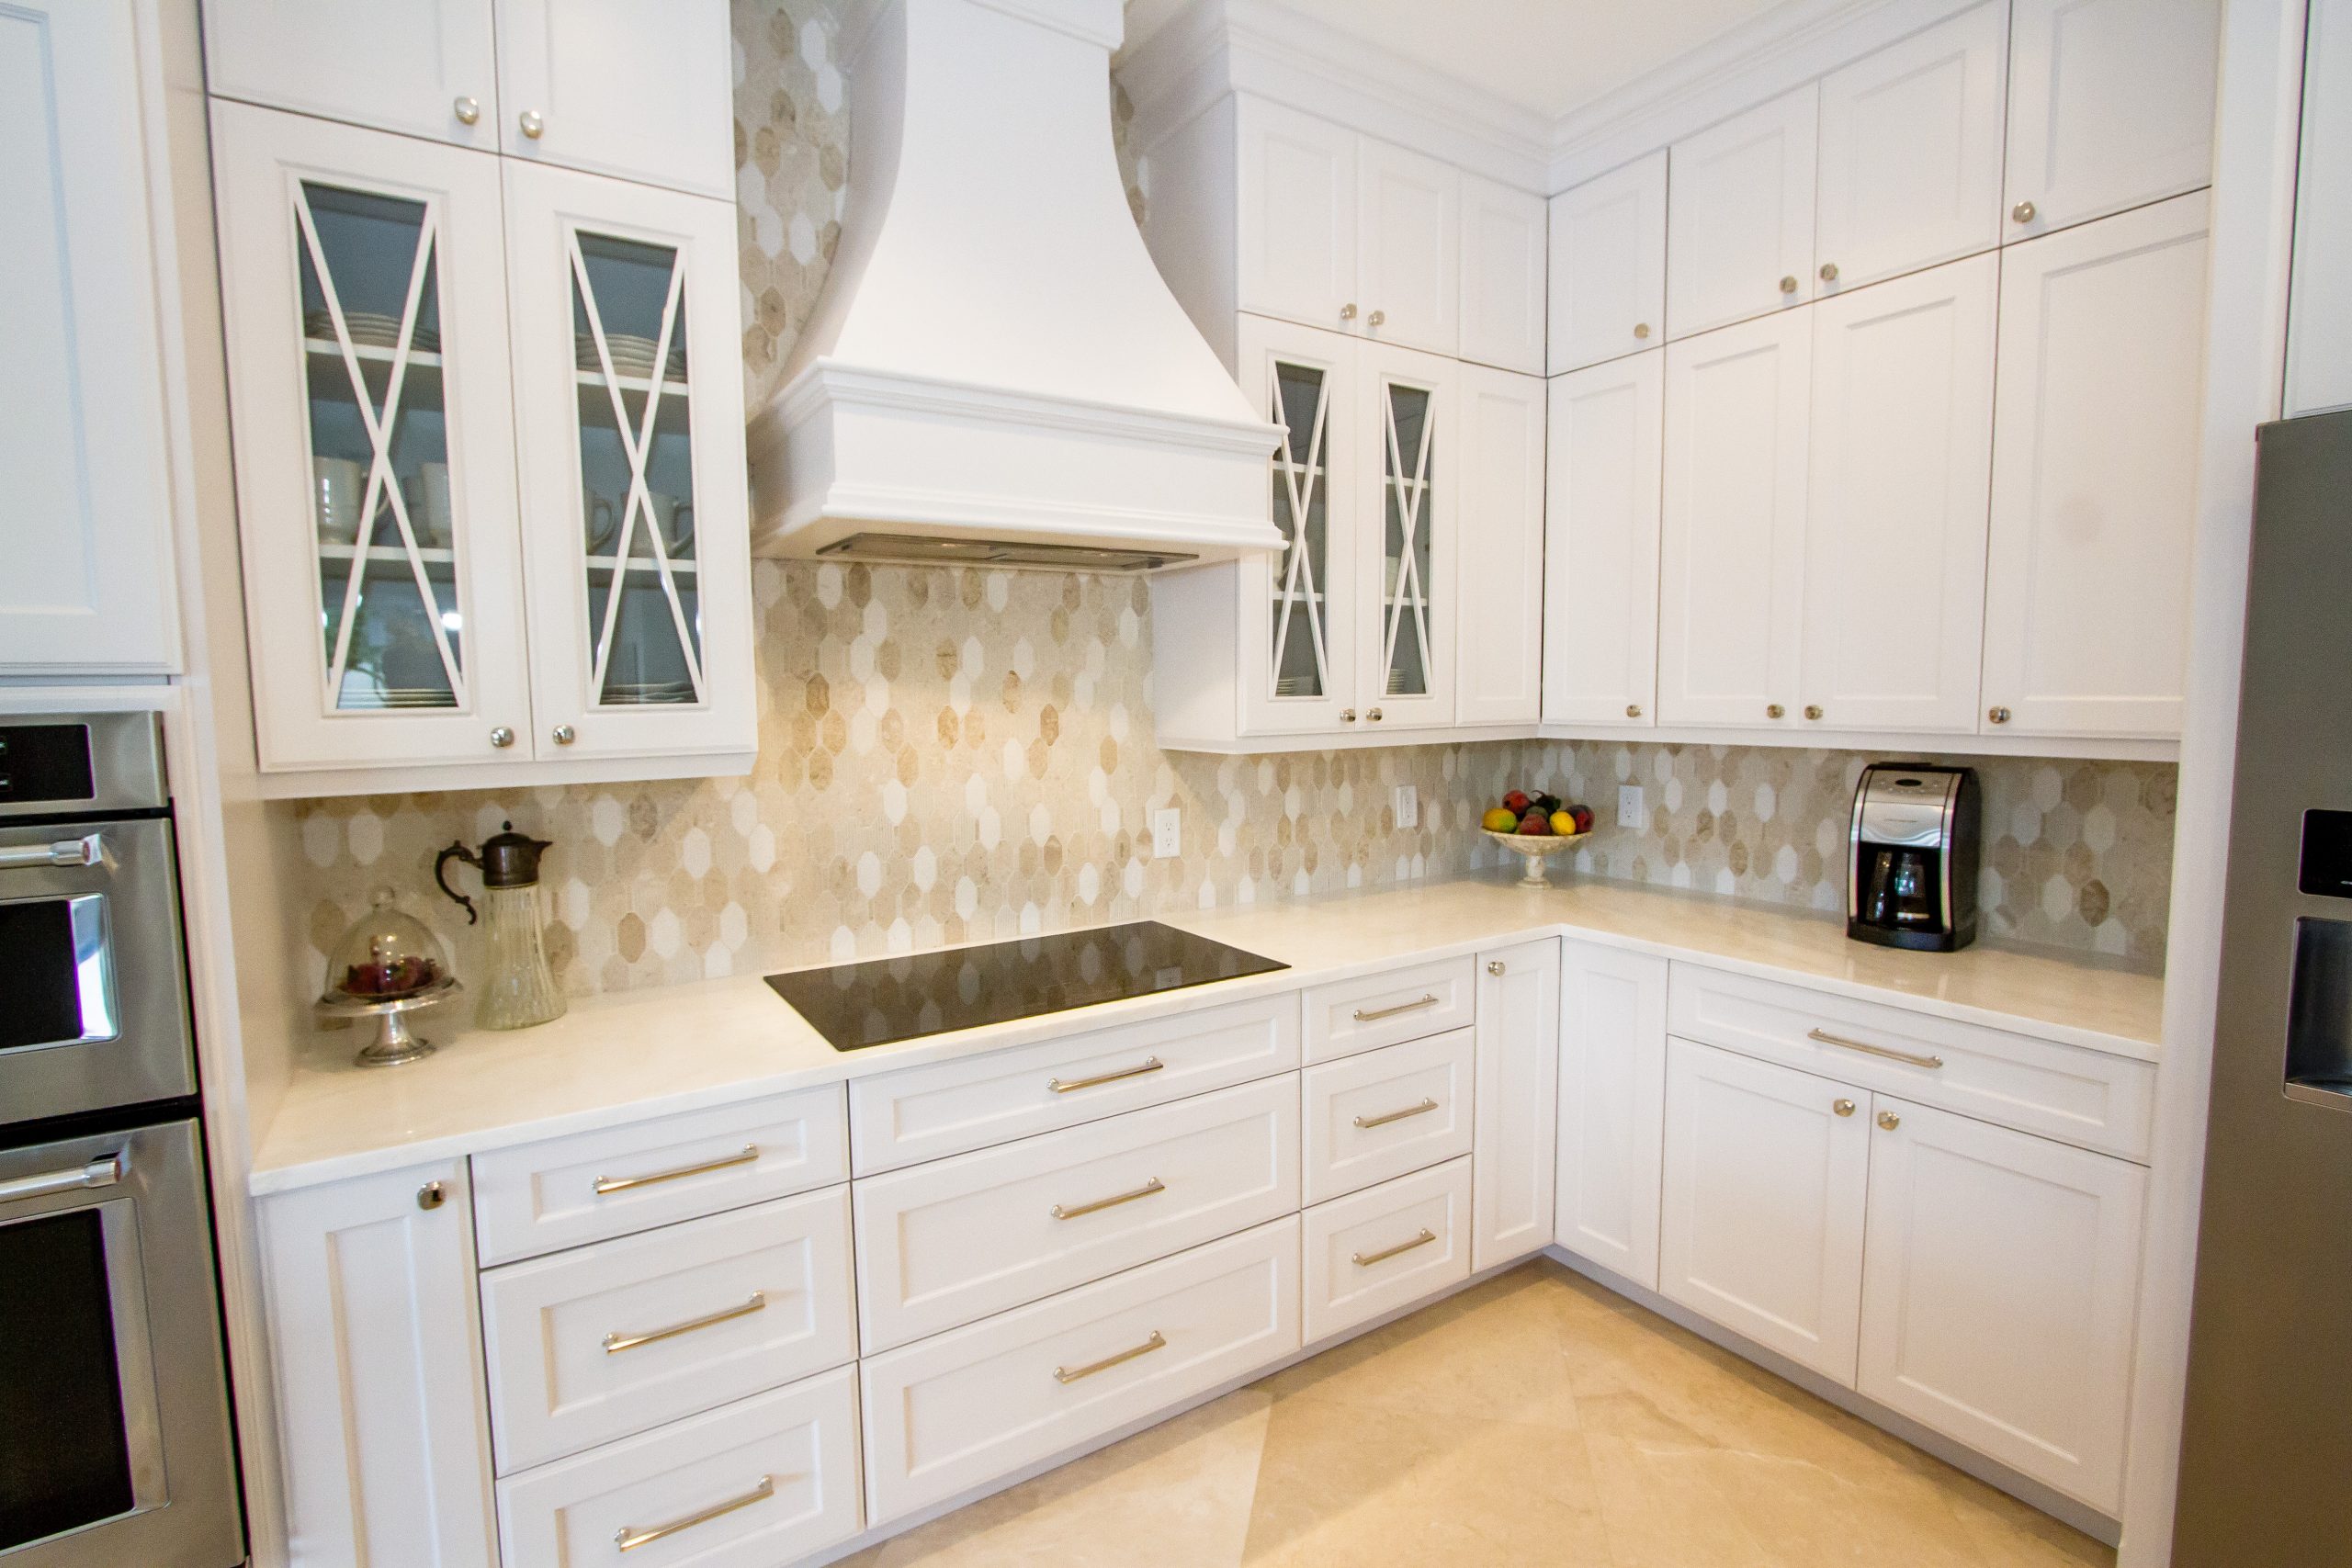 White marble kitchen countertops with oven vent